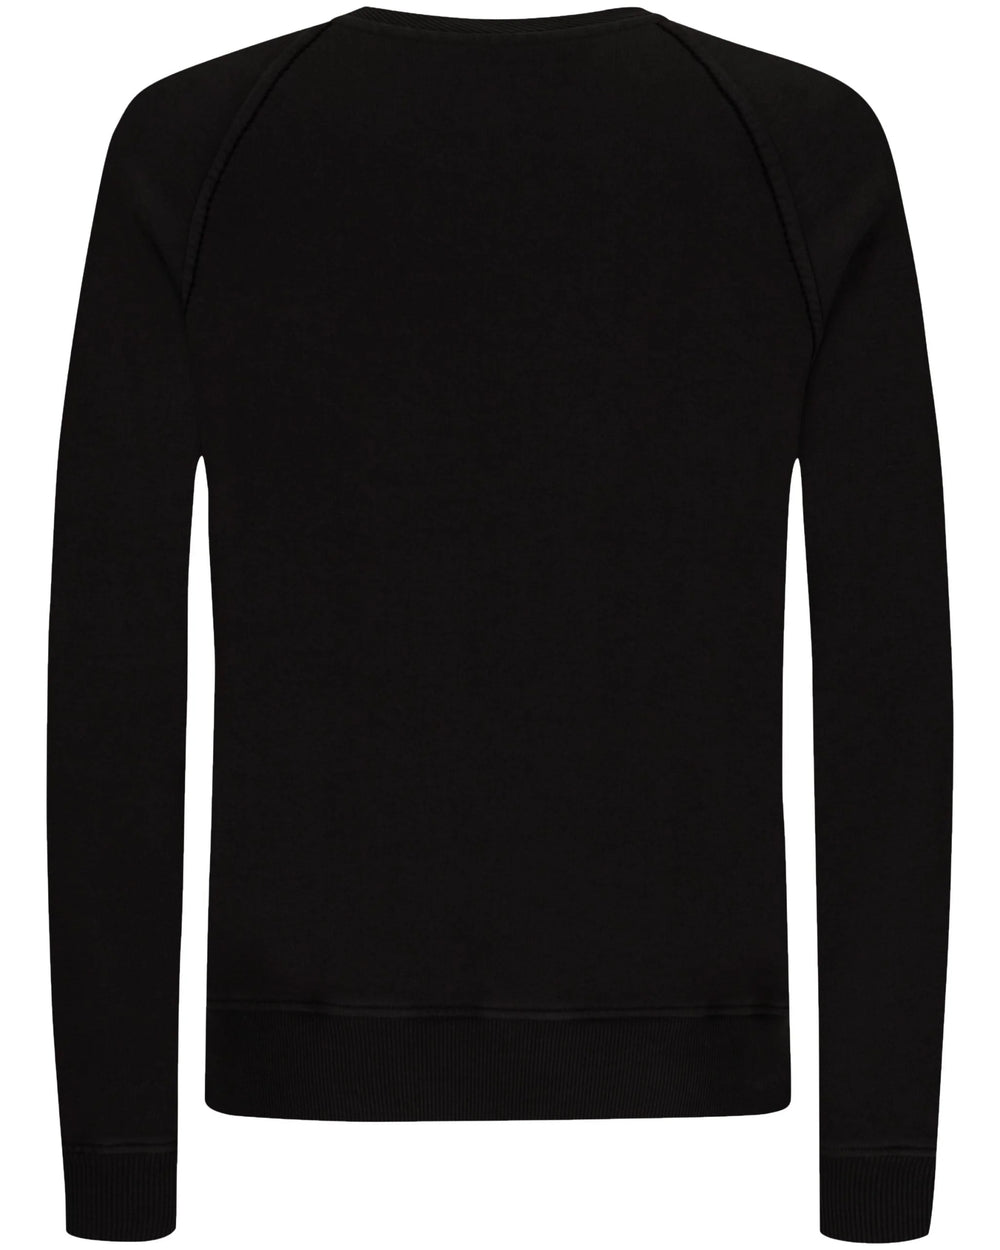 Jacob Cohen Black Cotton Sweater #men, Black, feed-agegroup-adult, feed-color-Black, feed-gender-male, Jacob Cohen, L, M, S, Sweaters - Men - Clothing, XL, XXL at SEYMAYKA